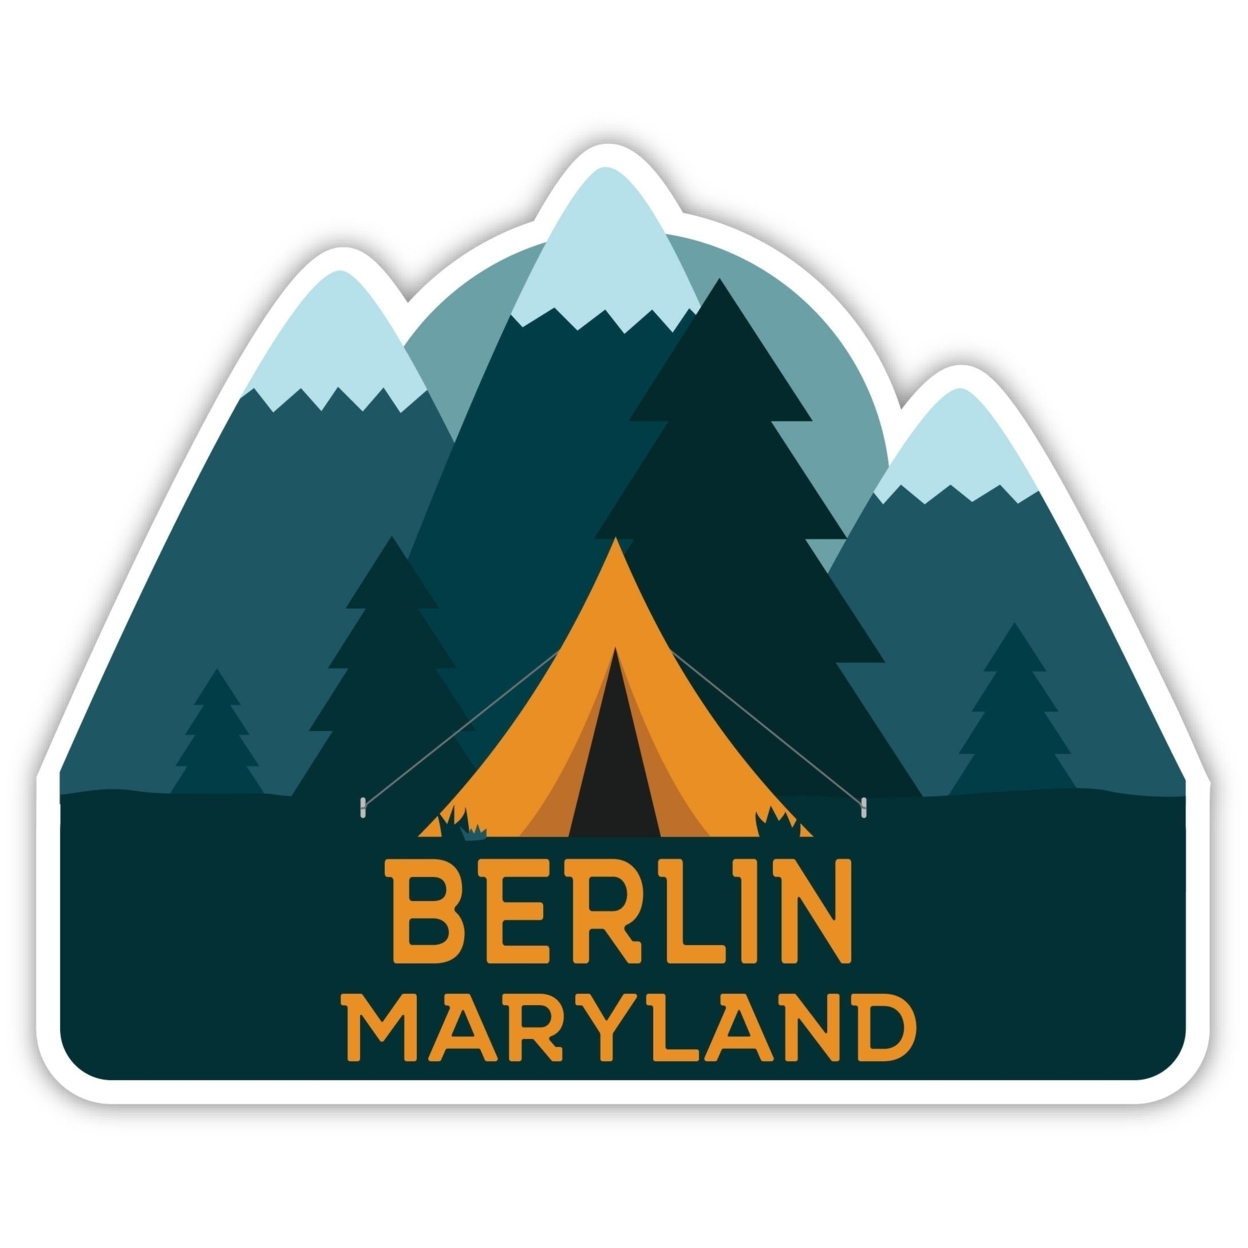 Berlin Maryland Souvenir Decorative Stickers (Choose Theme And Size) - 4-Pack, 12-Inch, Tent